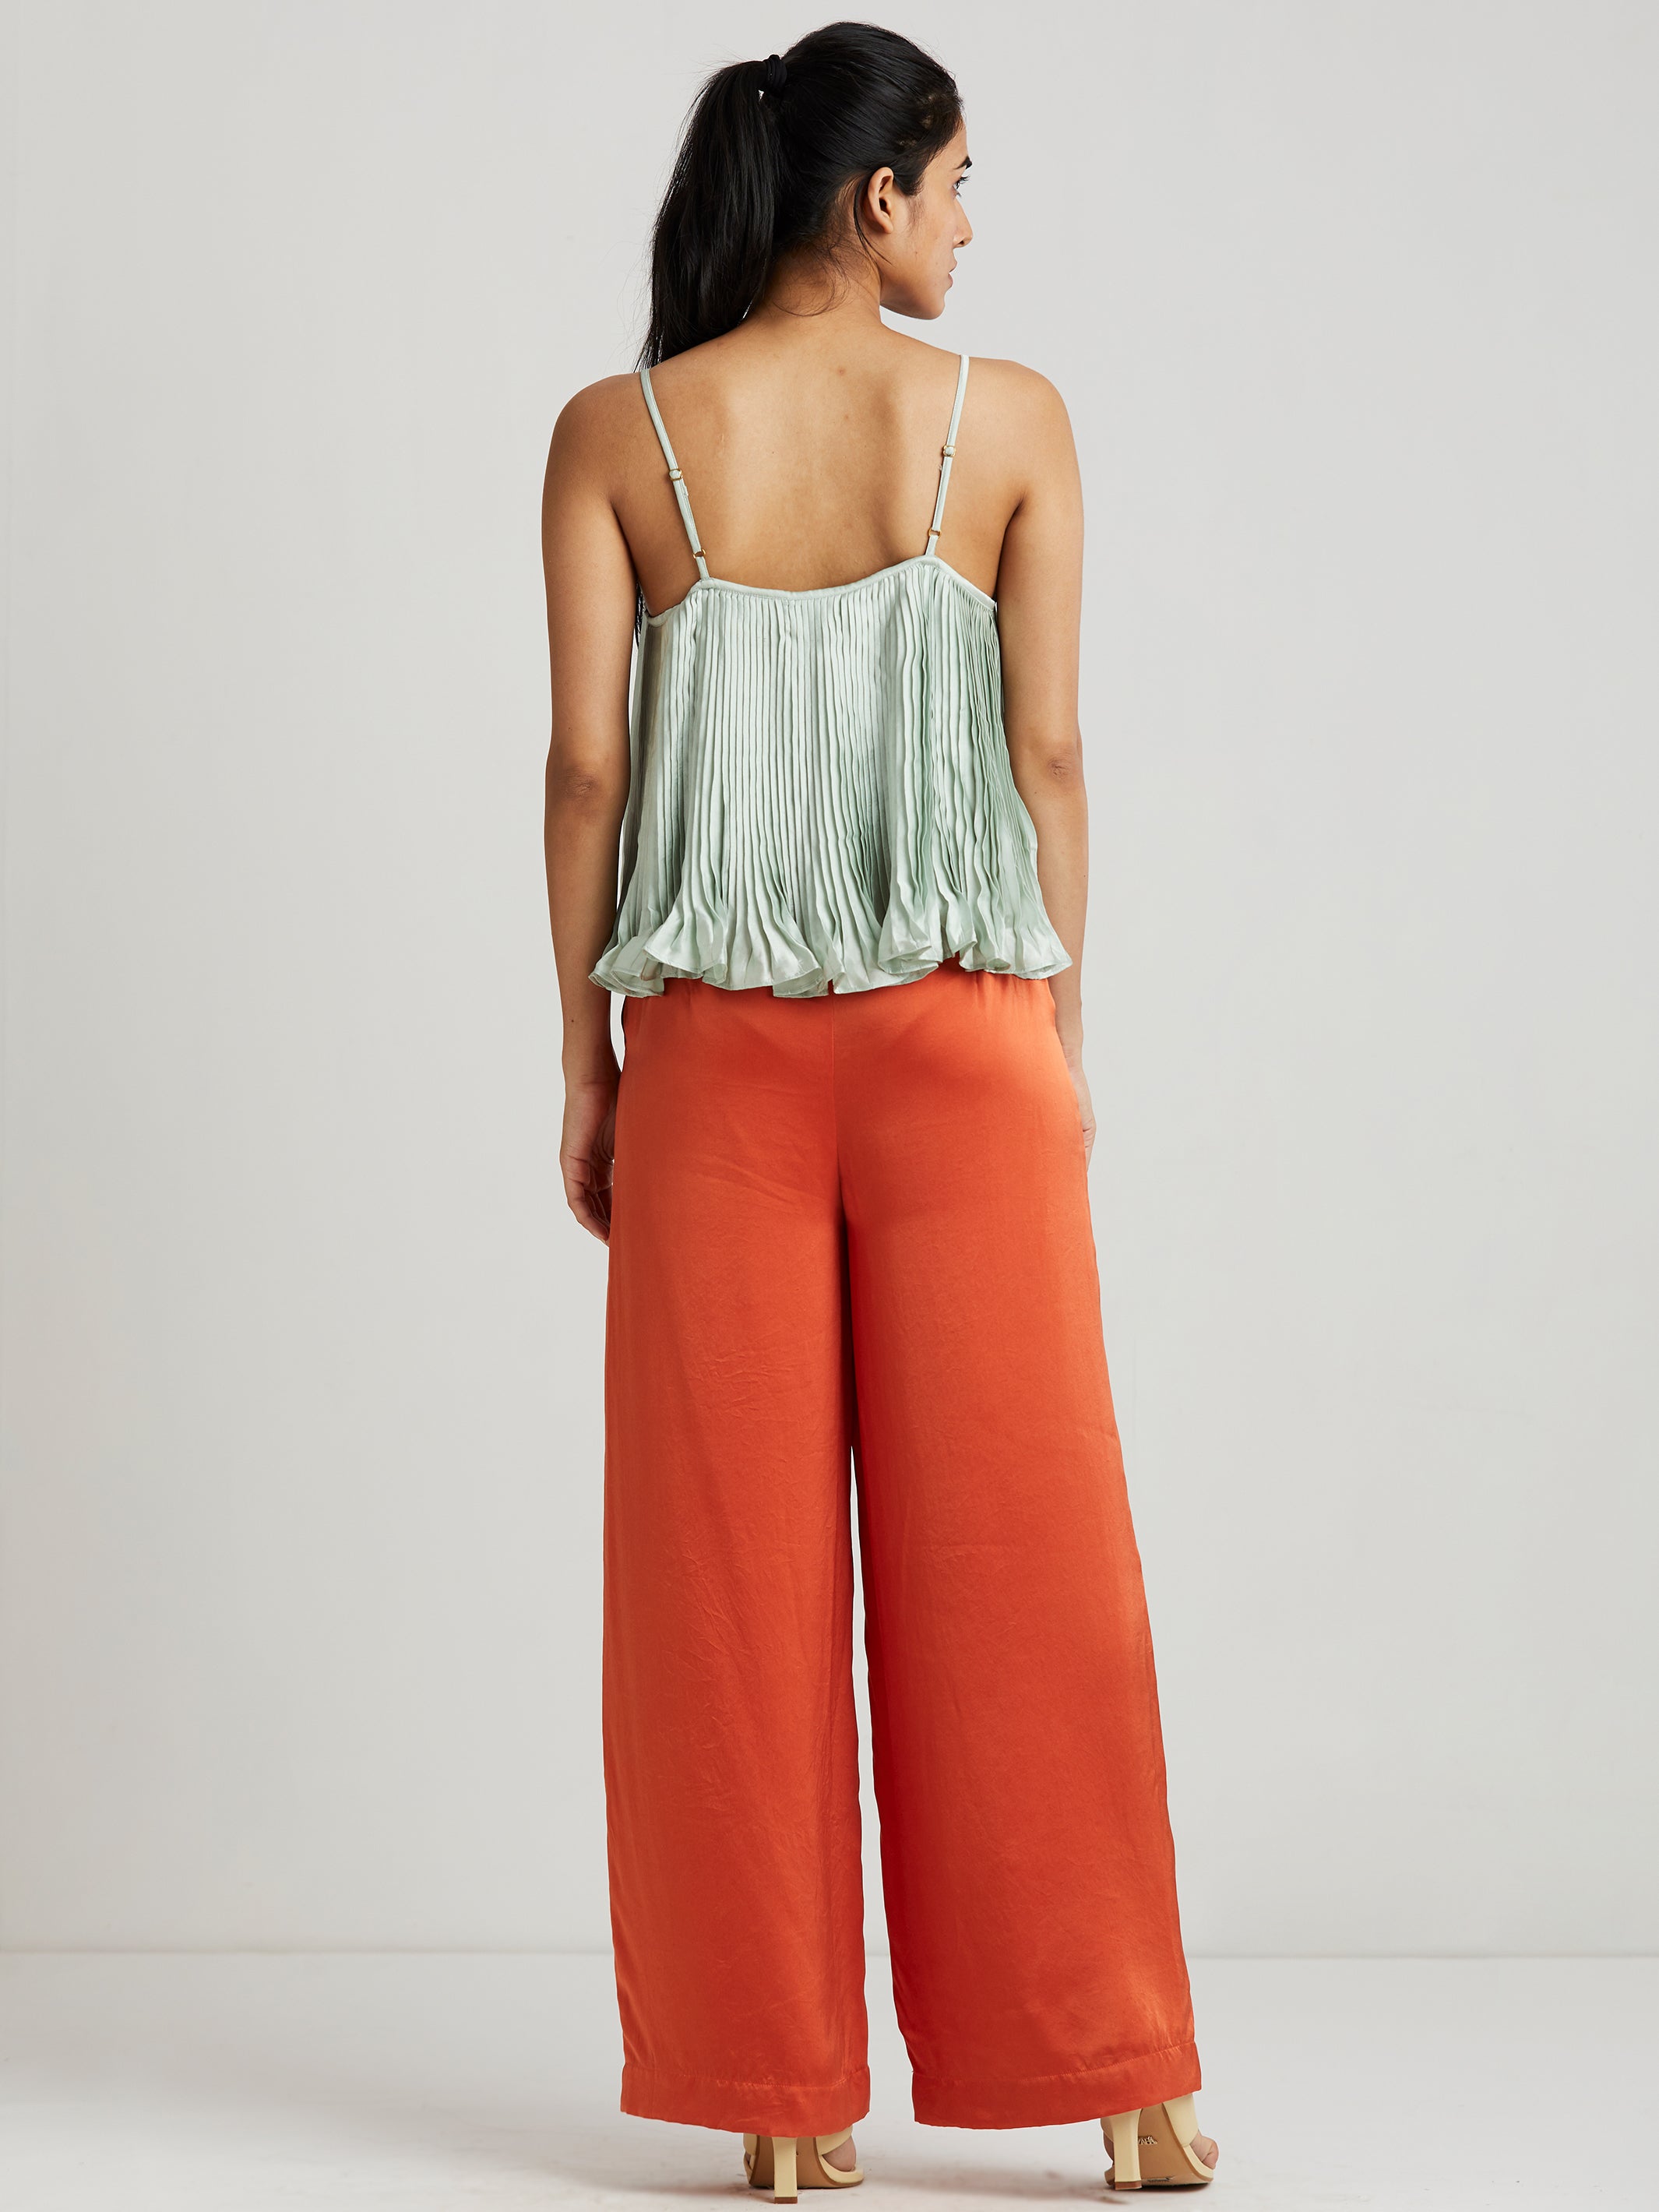 Flame Cami (Mint)